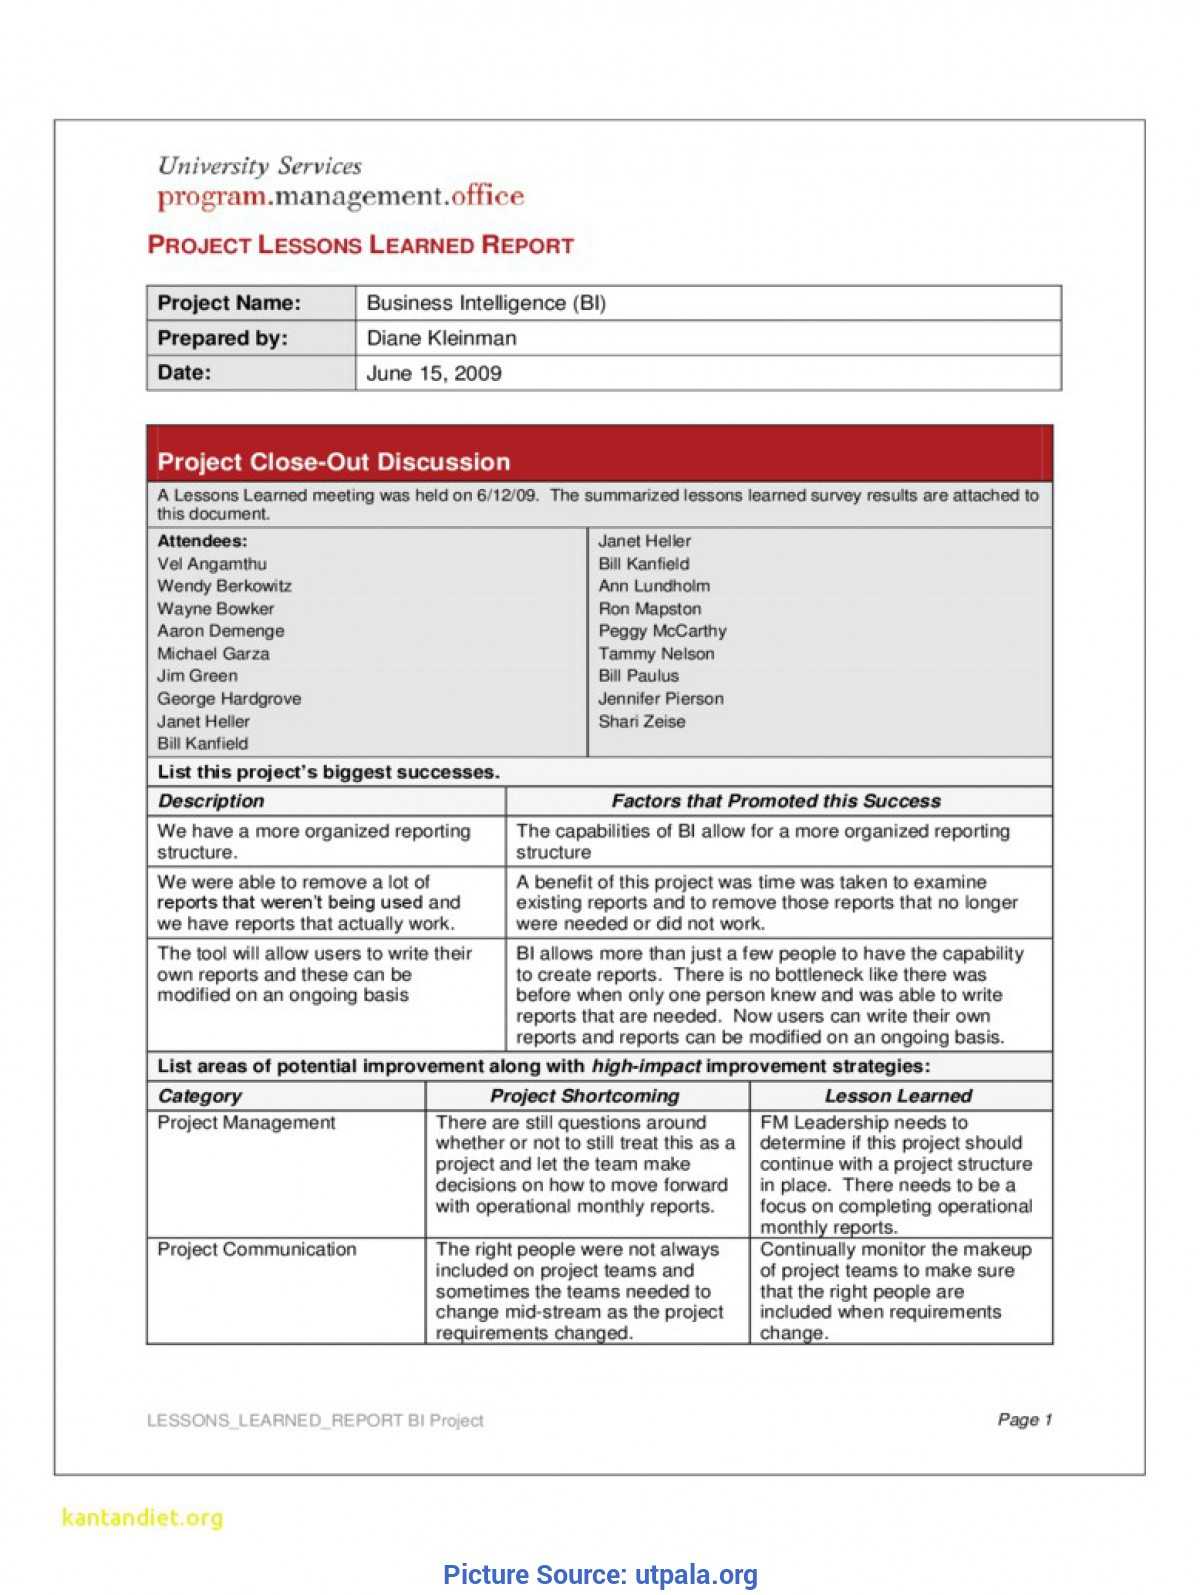 Complex Lessons Learned Template Download New Prince2 Throughout Prince2 Lessons Learned Report Template